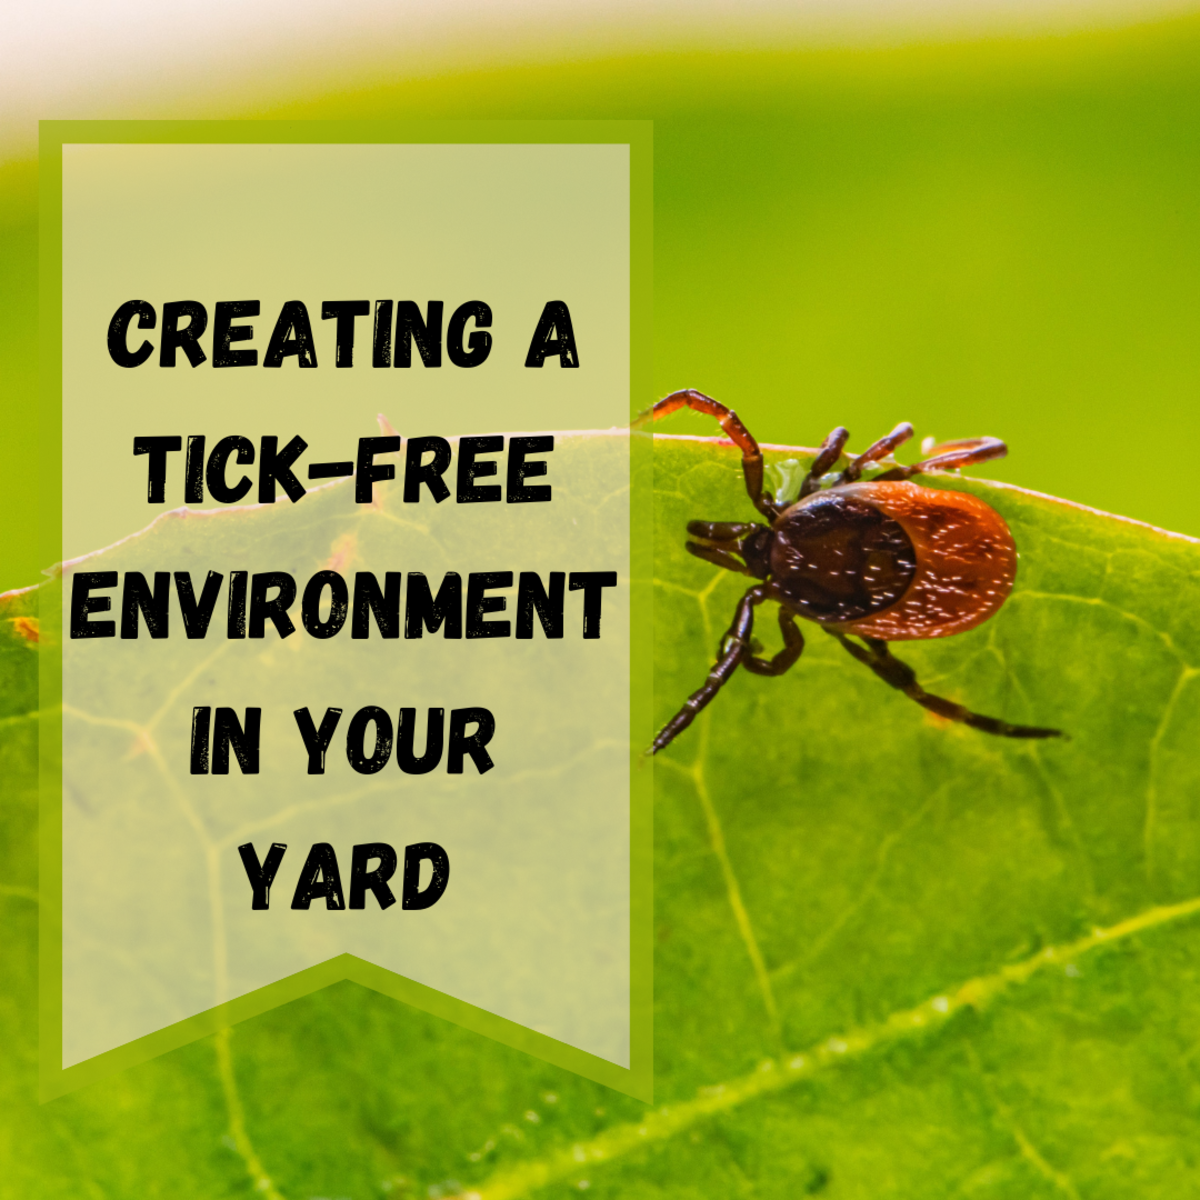 Tips For Designing a Tick